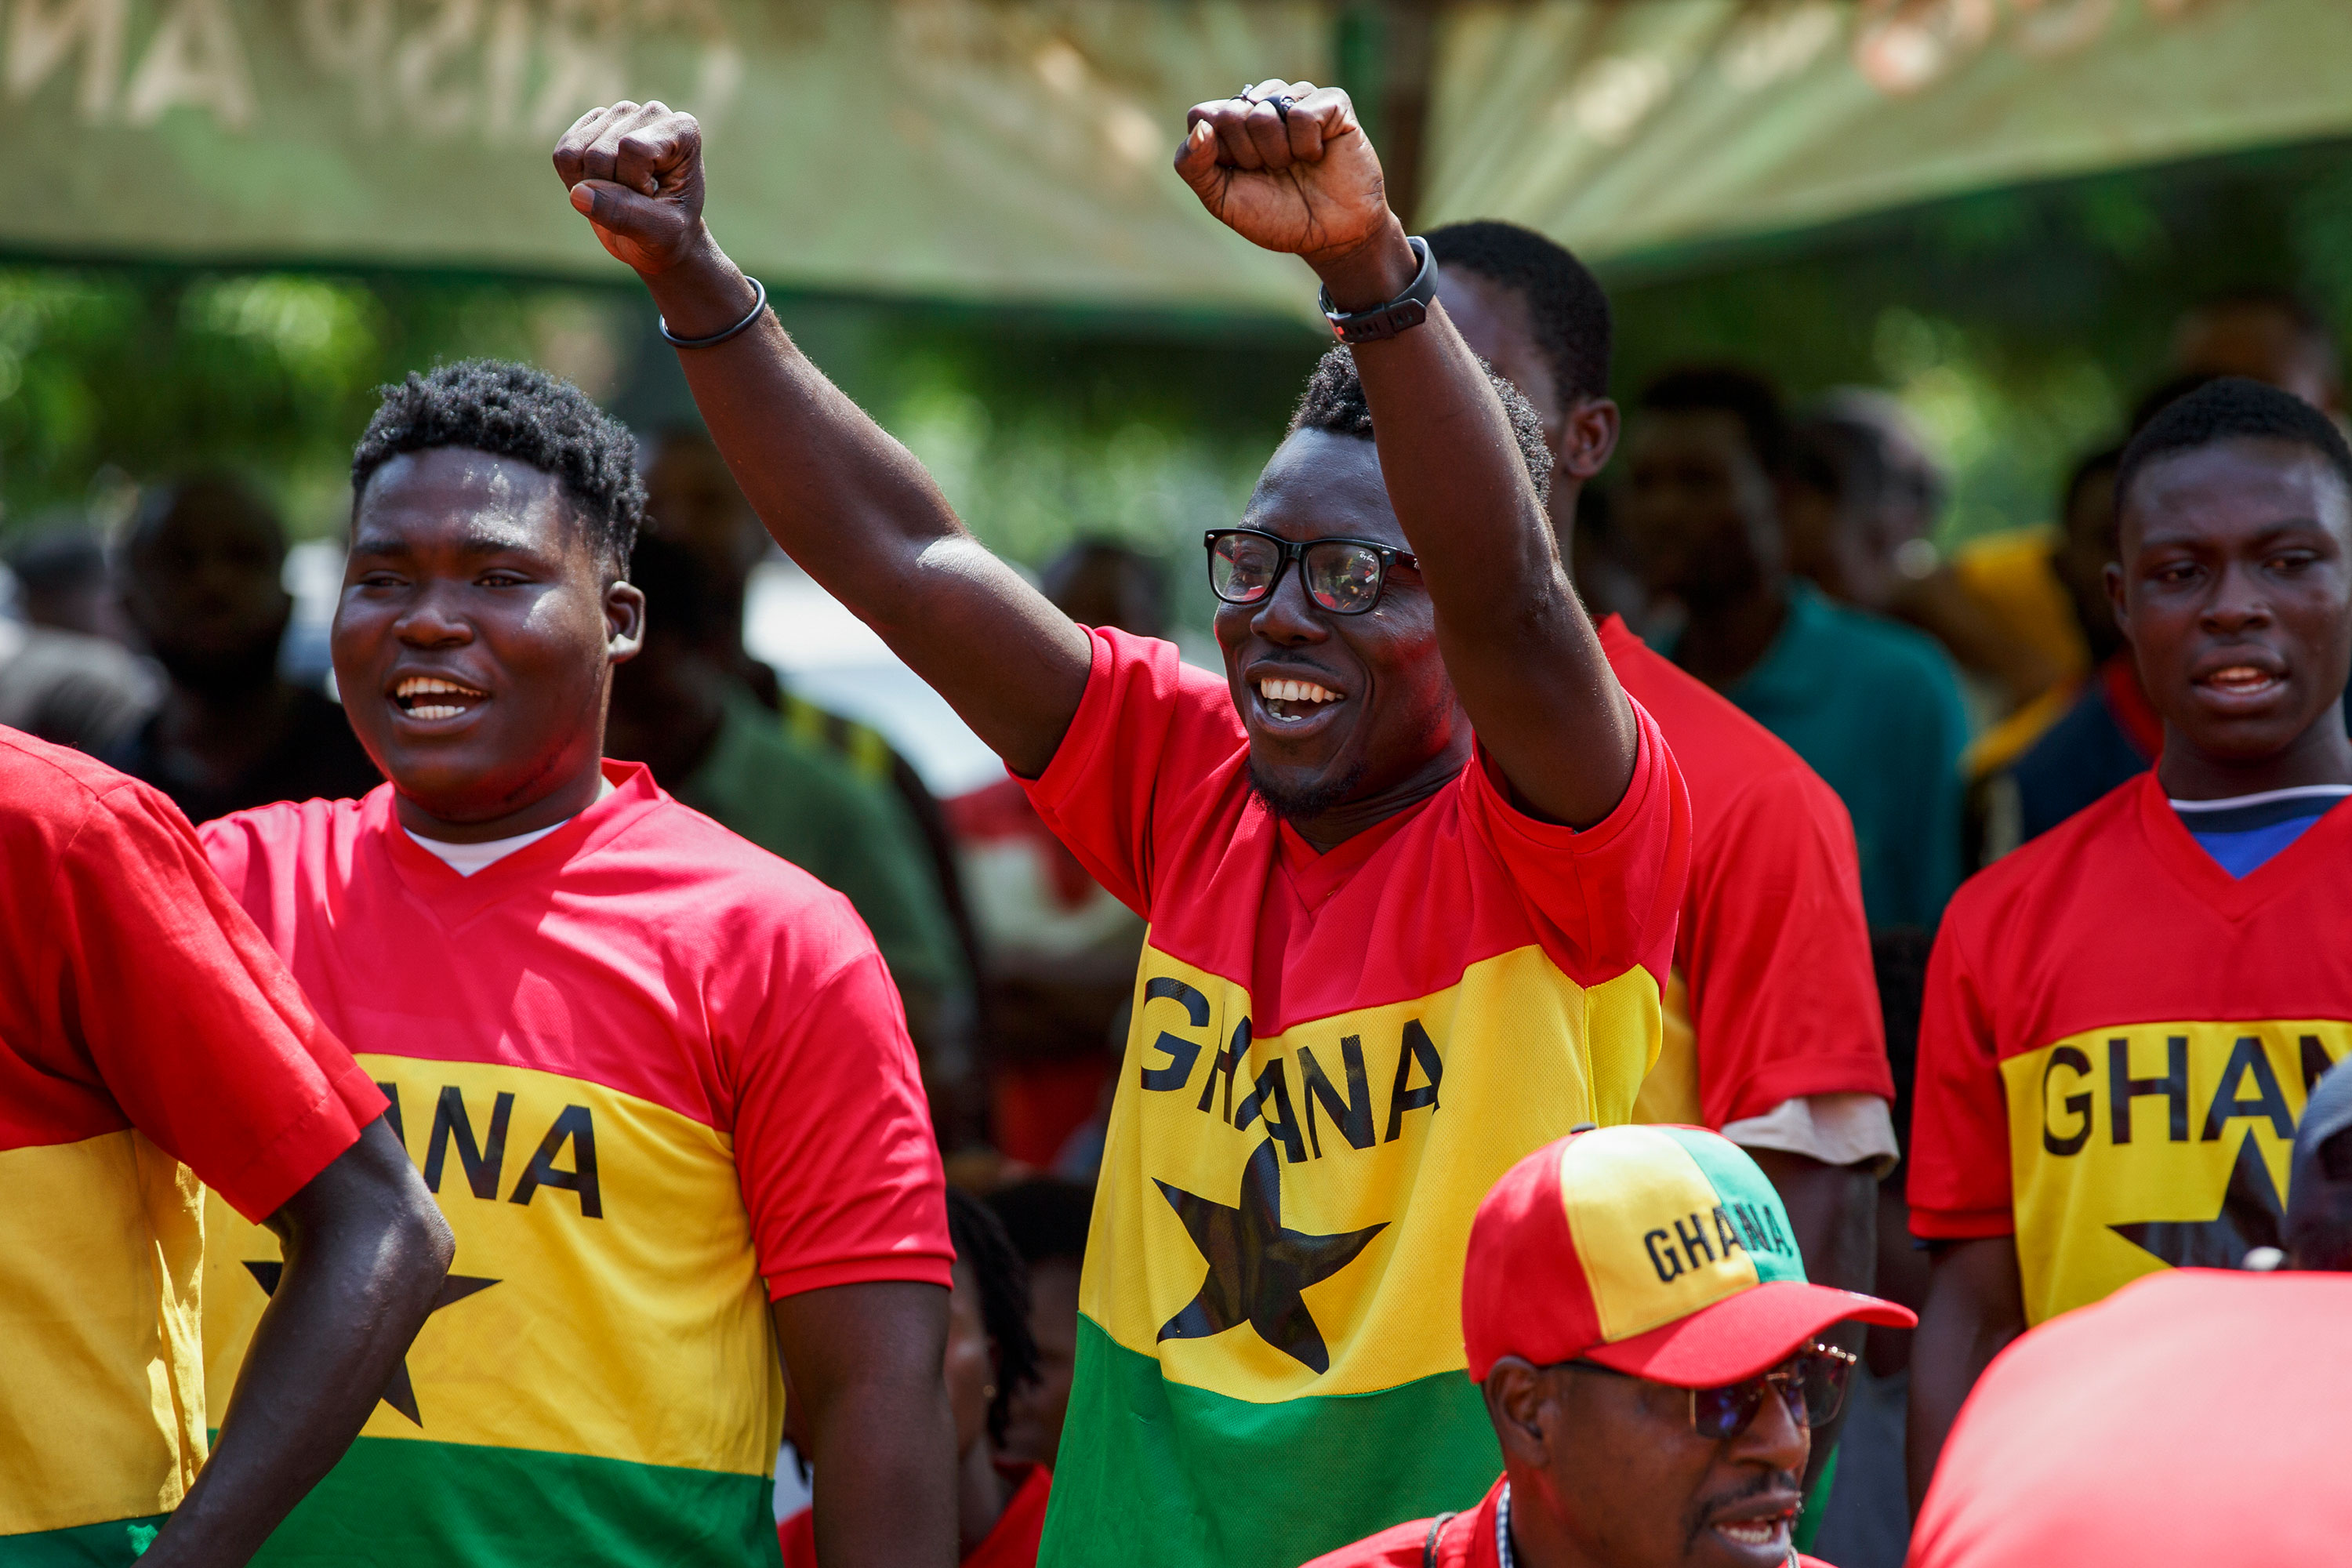 Fans cheer as they watch the match in Accra, Ghana, on Monday.